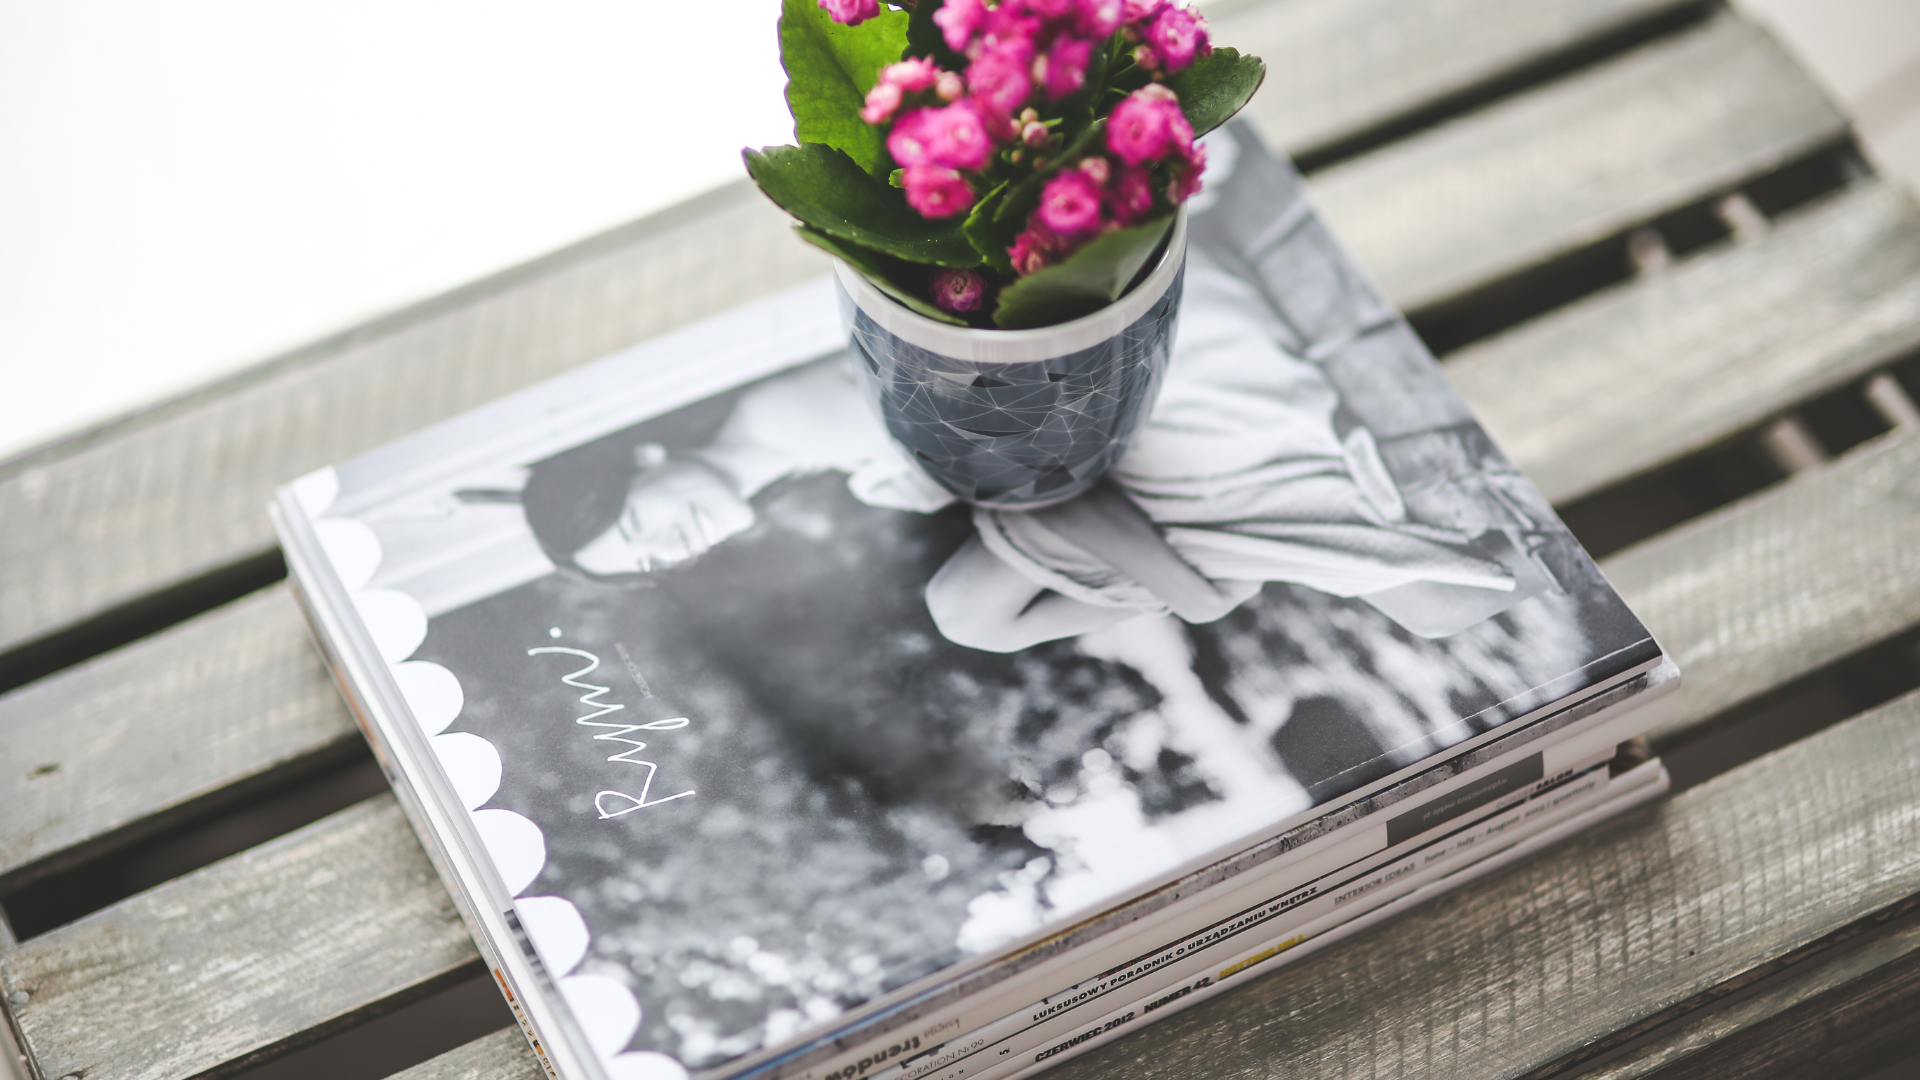 50% Off Sale on Oversized Coffee Table Books!